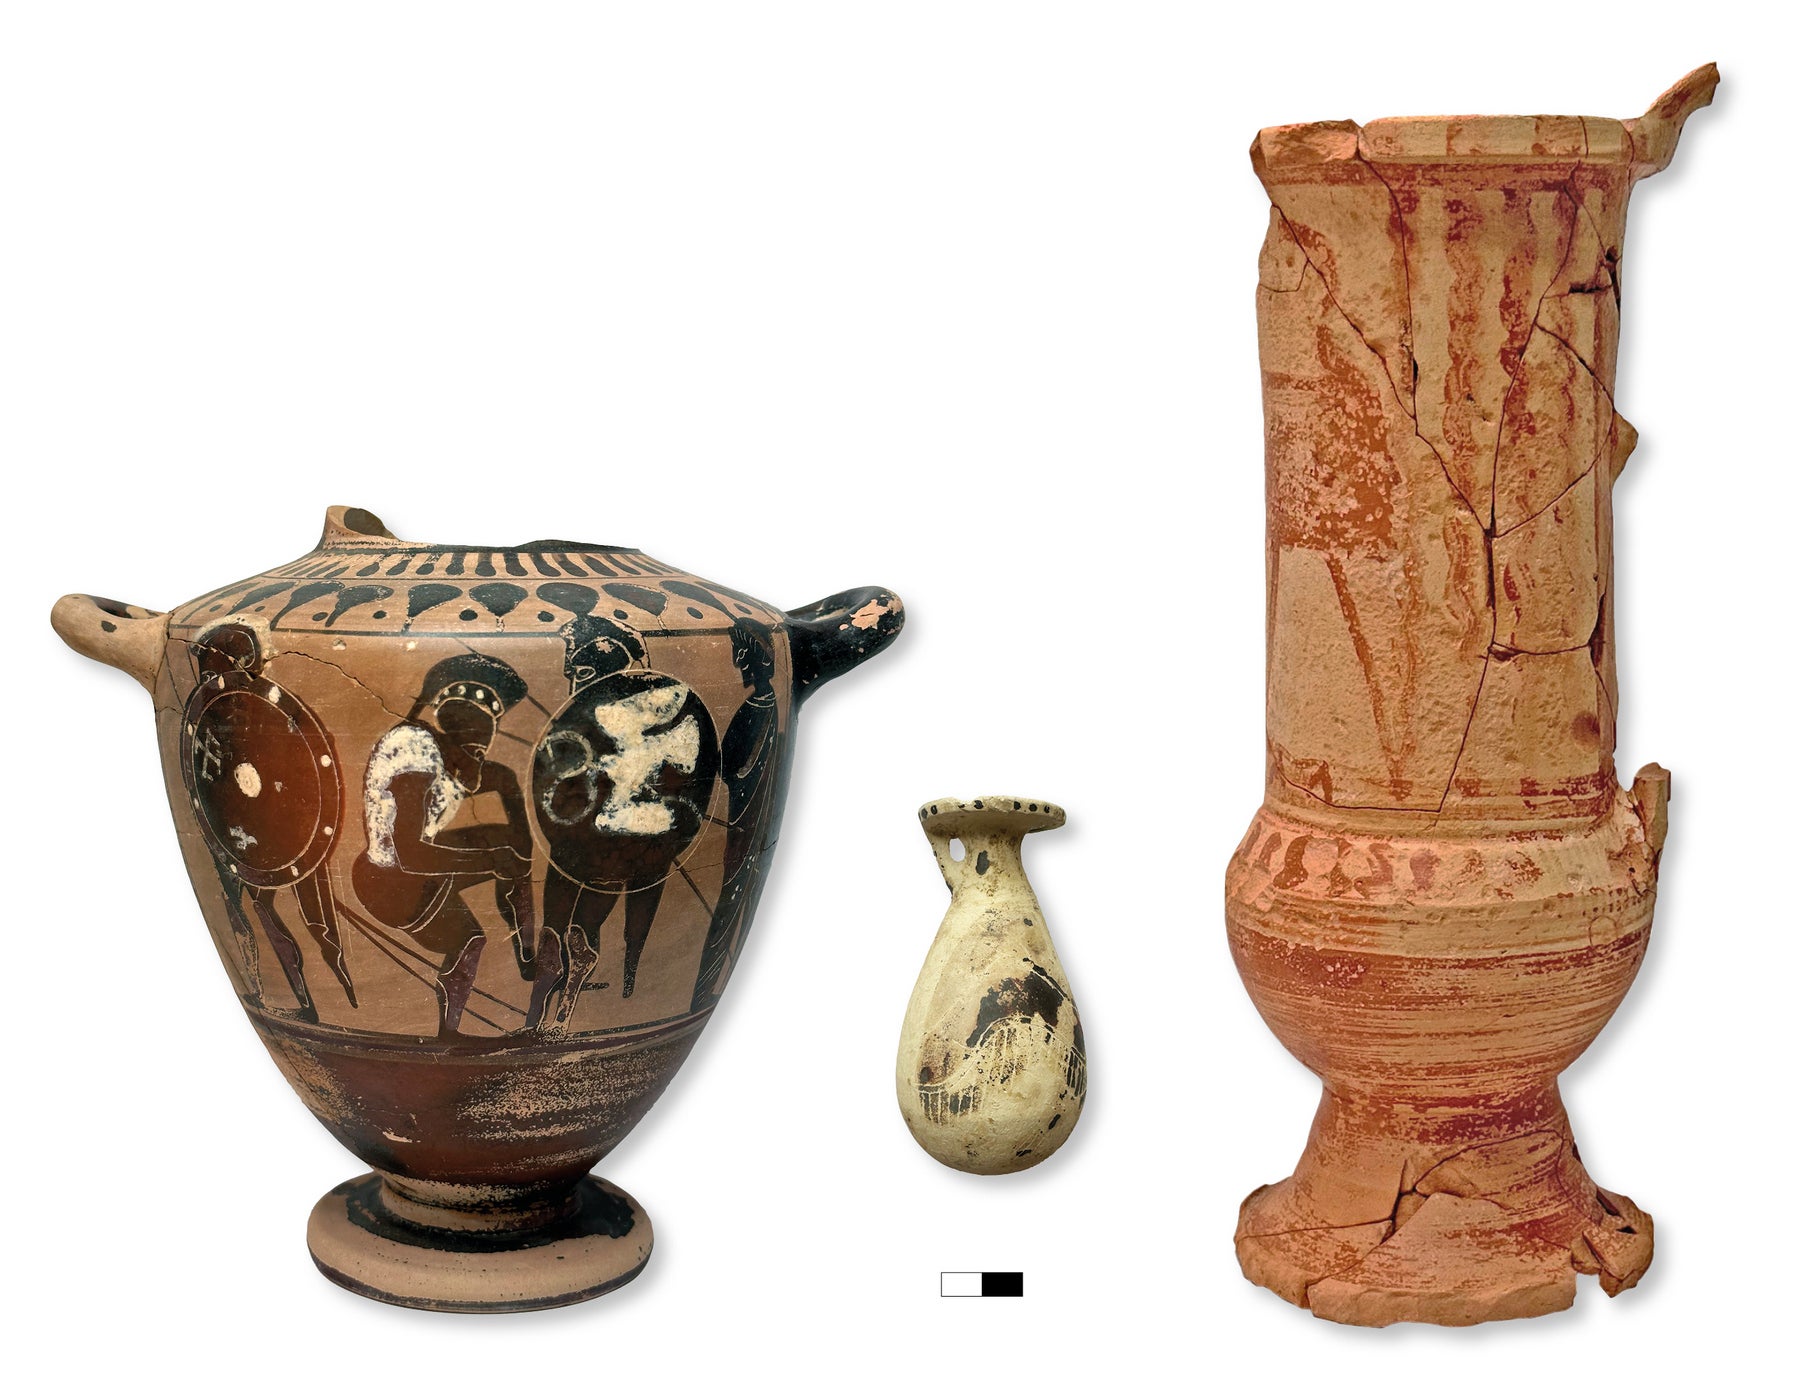 Vases were also found in the temple, unearthed by a team of 50 researchers